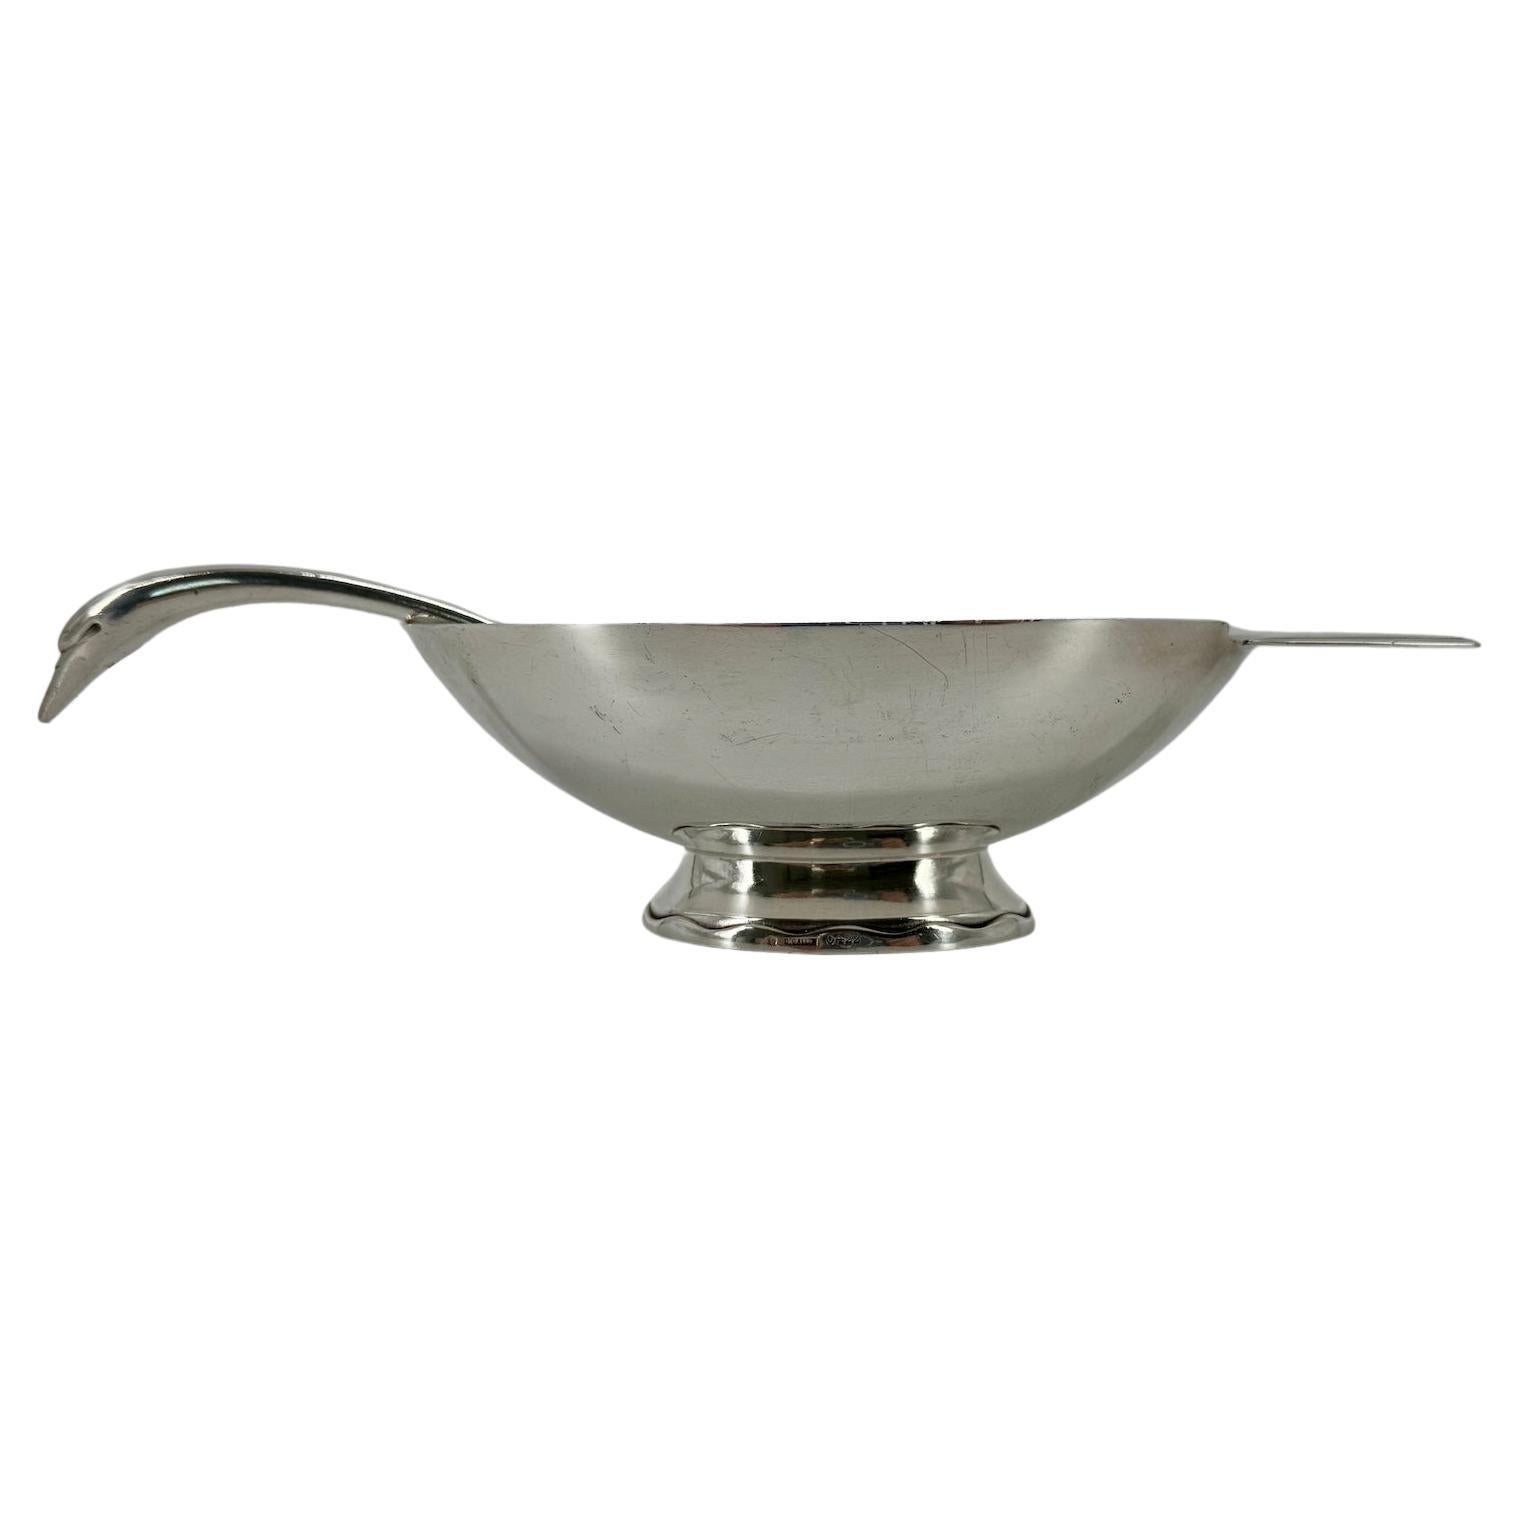 Gallia For Christofle, Gravy Boat ’Swan’ and its spoon By Christian Fjerdingstad For Sale